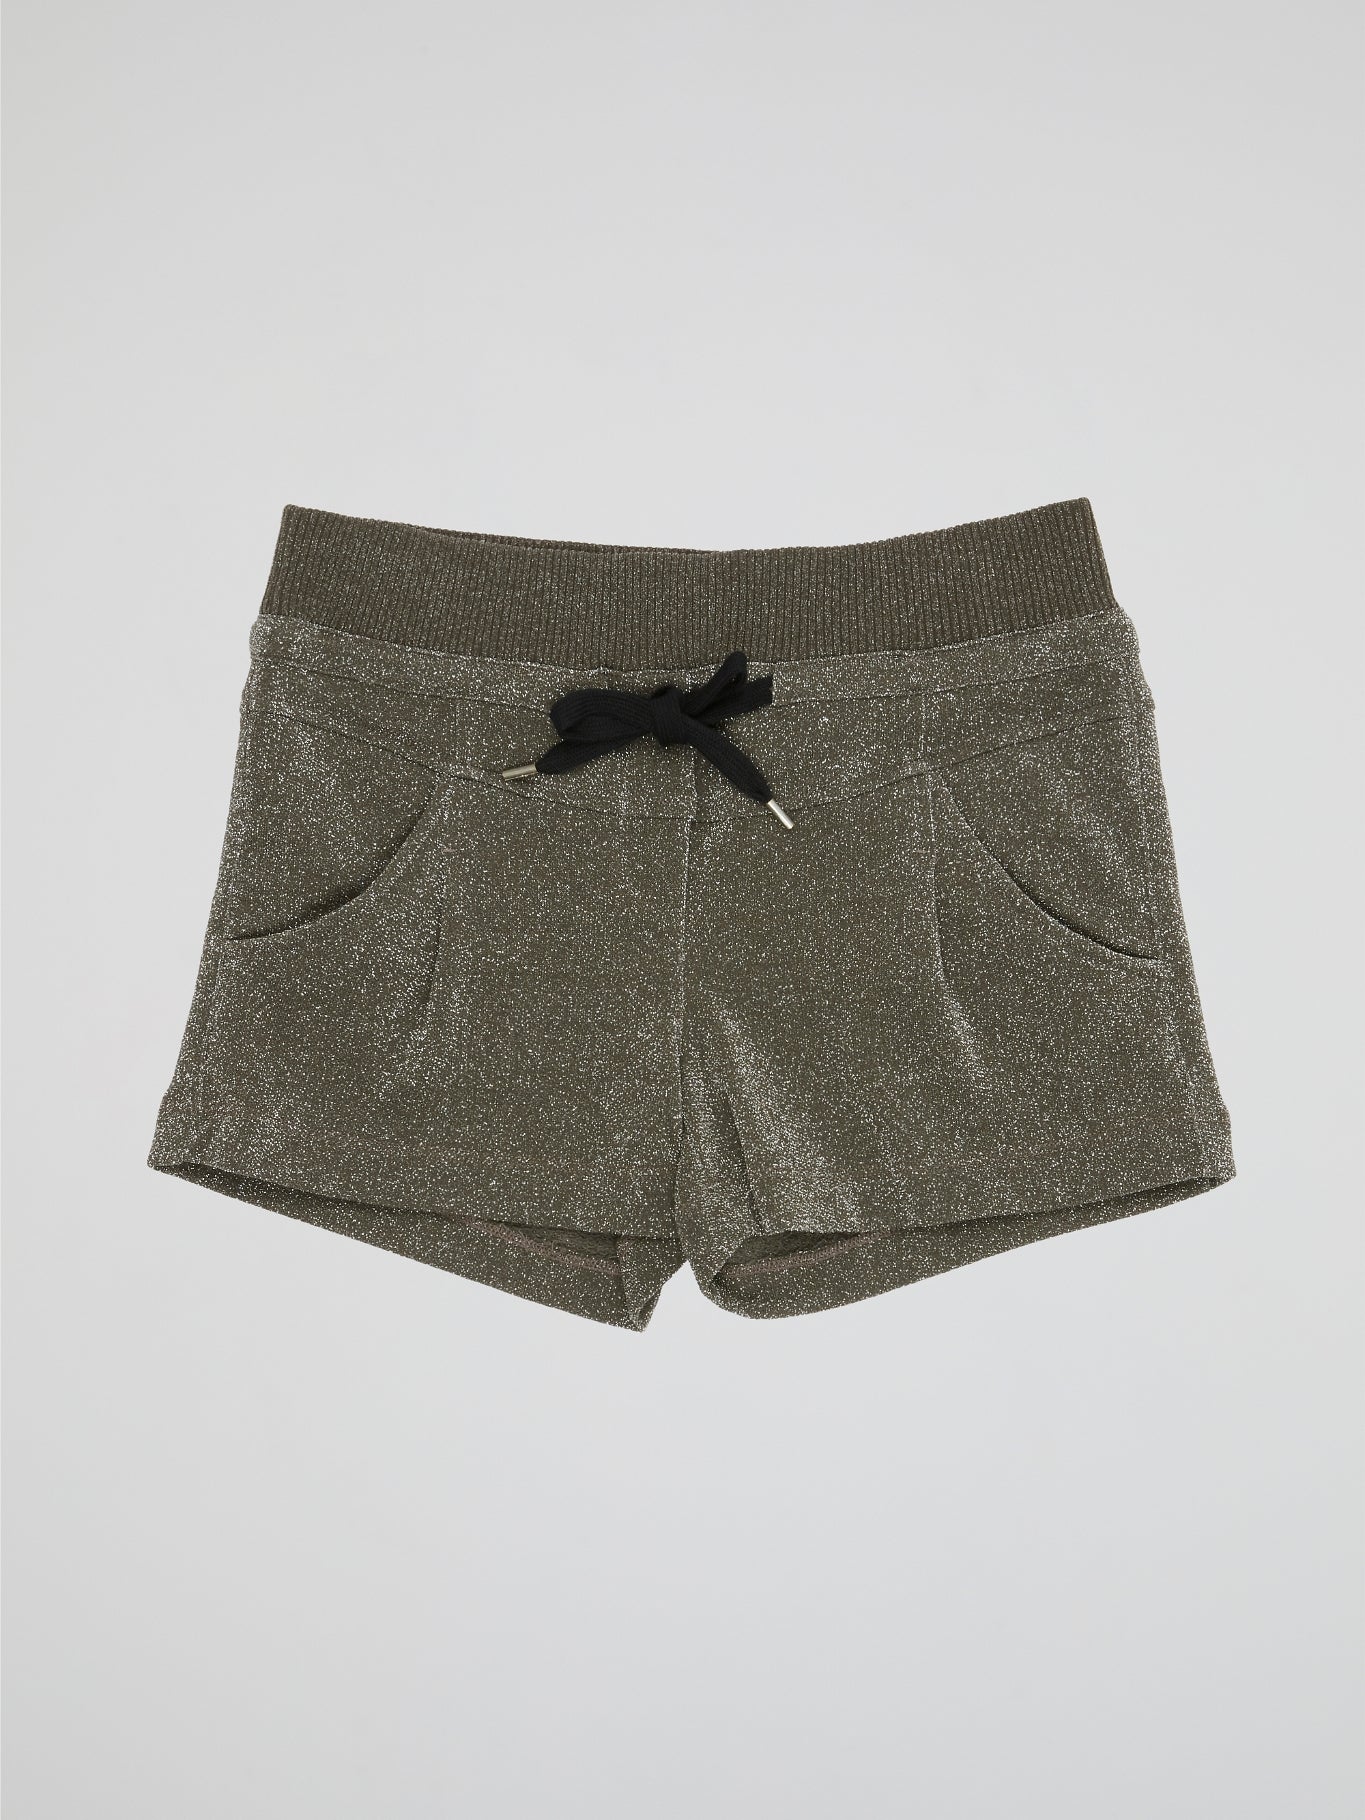 Add some sparkle to your wardrobe with our Glittered Drawstring Shorts from Atos Lombardini. These shimmering shorts are perfect for a night out on the town or a fun day at the beach. The drawstring waist offers a comfortable and adjustable fit, making them a versatile addition to your summer wardrobe.